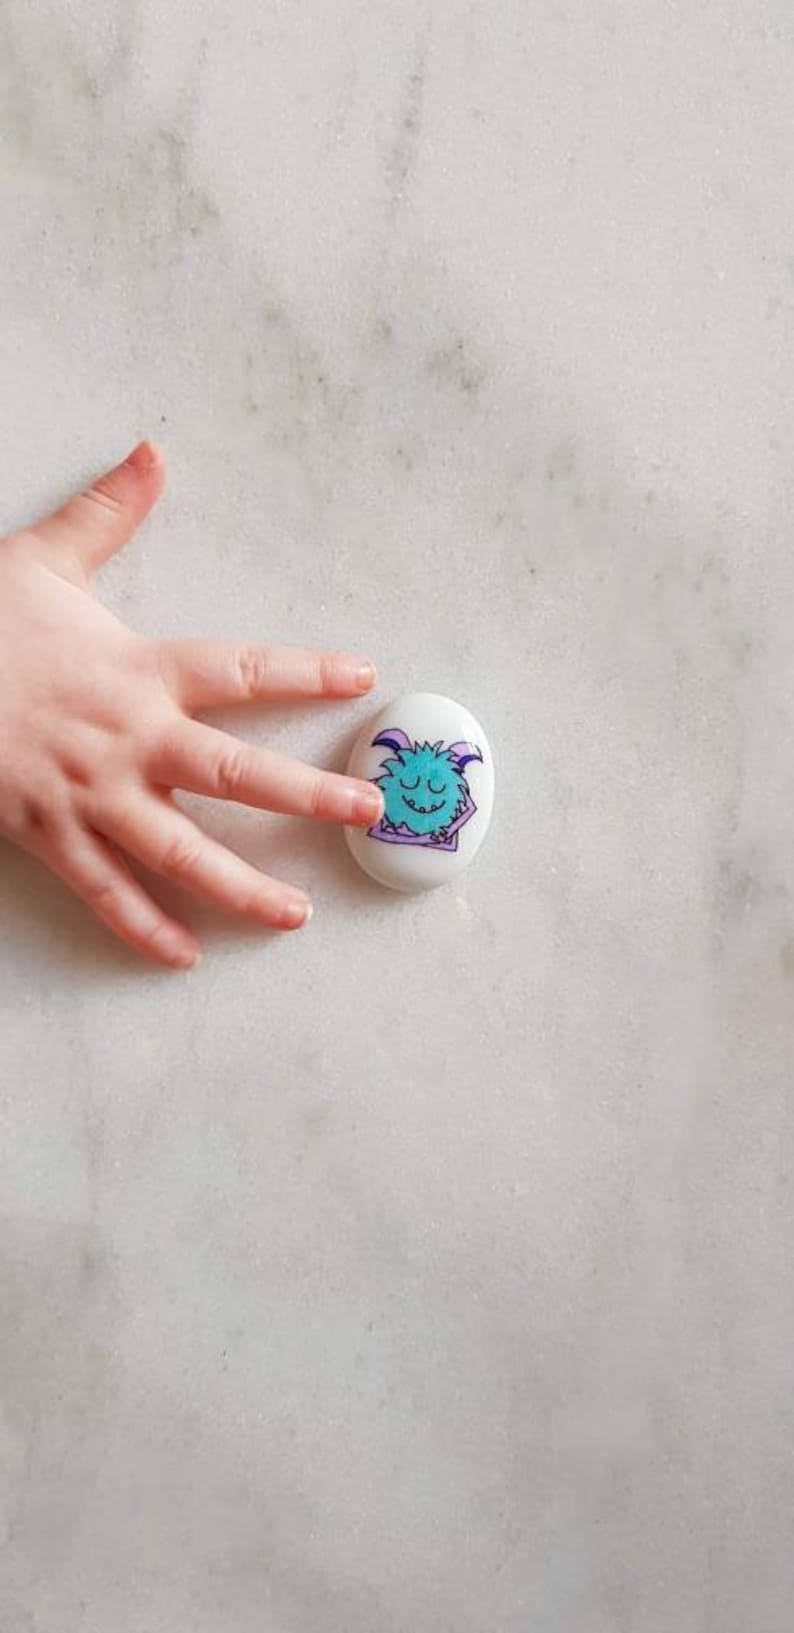 Mindful Monster, Mindfulness, Worry Stone, Childrens, Anxiety Aid, Stress Relief, Sensory Toy, Kids, Meditation, Fiddle Toy, Calming, Yoga image 6